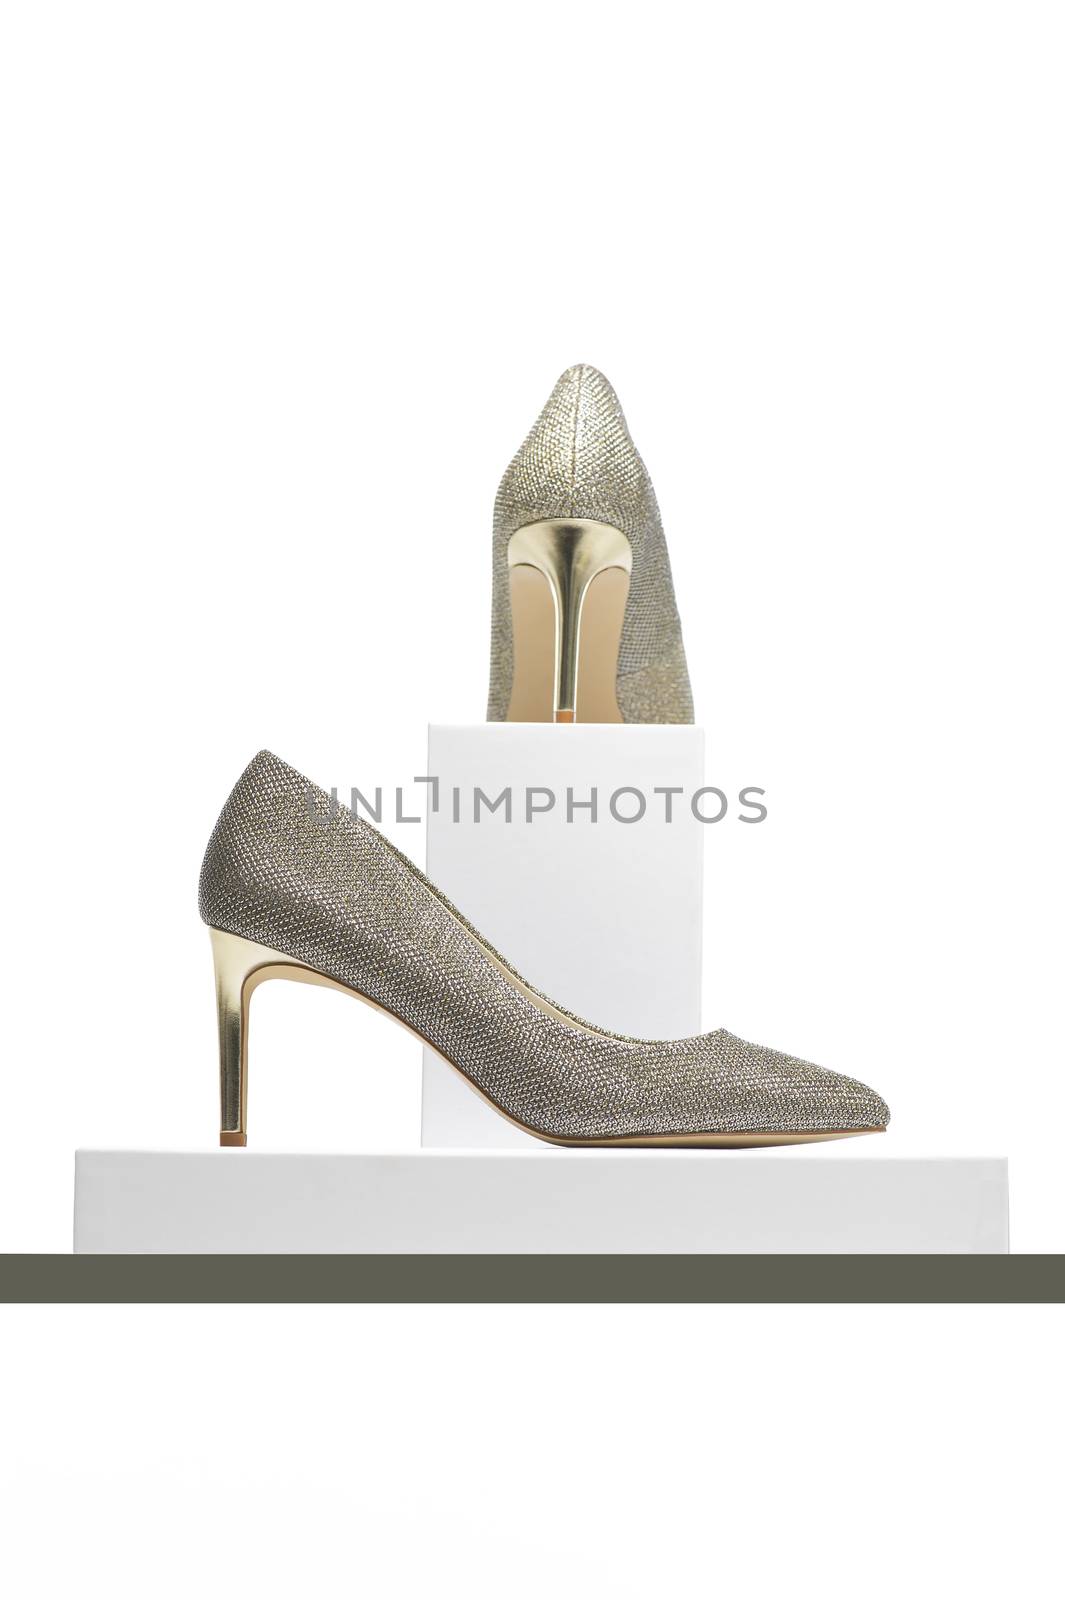 Pair of elegant classic high heeled silver ladies court shoes for evening wear on display in side view and viewed from behind on pedestals, isolated on white